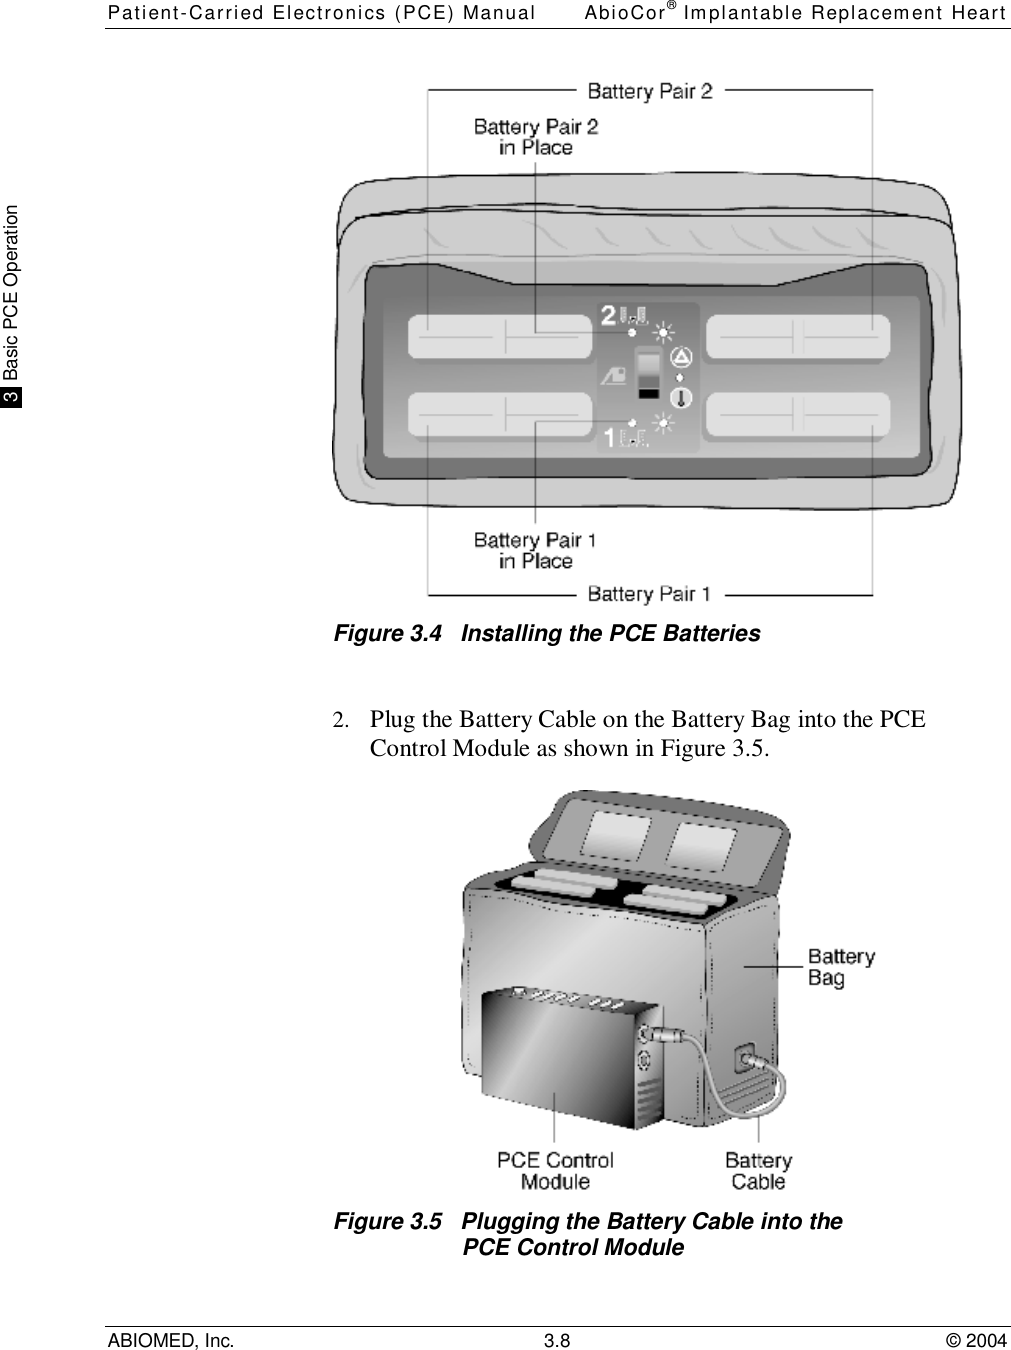 Patient-Carried Electronics (PCE) Manual AbioCor® Implantable Replacement HeartABIOMED, Inc. 3.8 © 2004 3  Basic PCE OperationFigure 3.4   Installing the PCE Batteries2. Plug the Battery Cable on the Battery Bag into the PCEControl Module as shown in Figure 3.5.Figure 3.5   Plugging the Battery Cable into thePCE Control Module